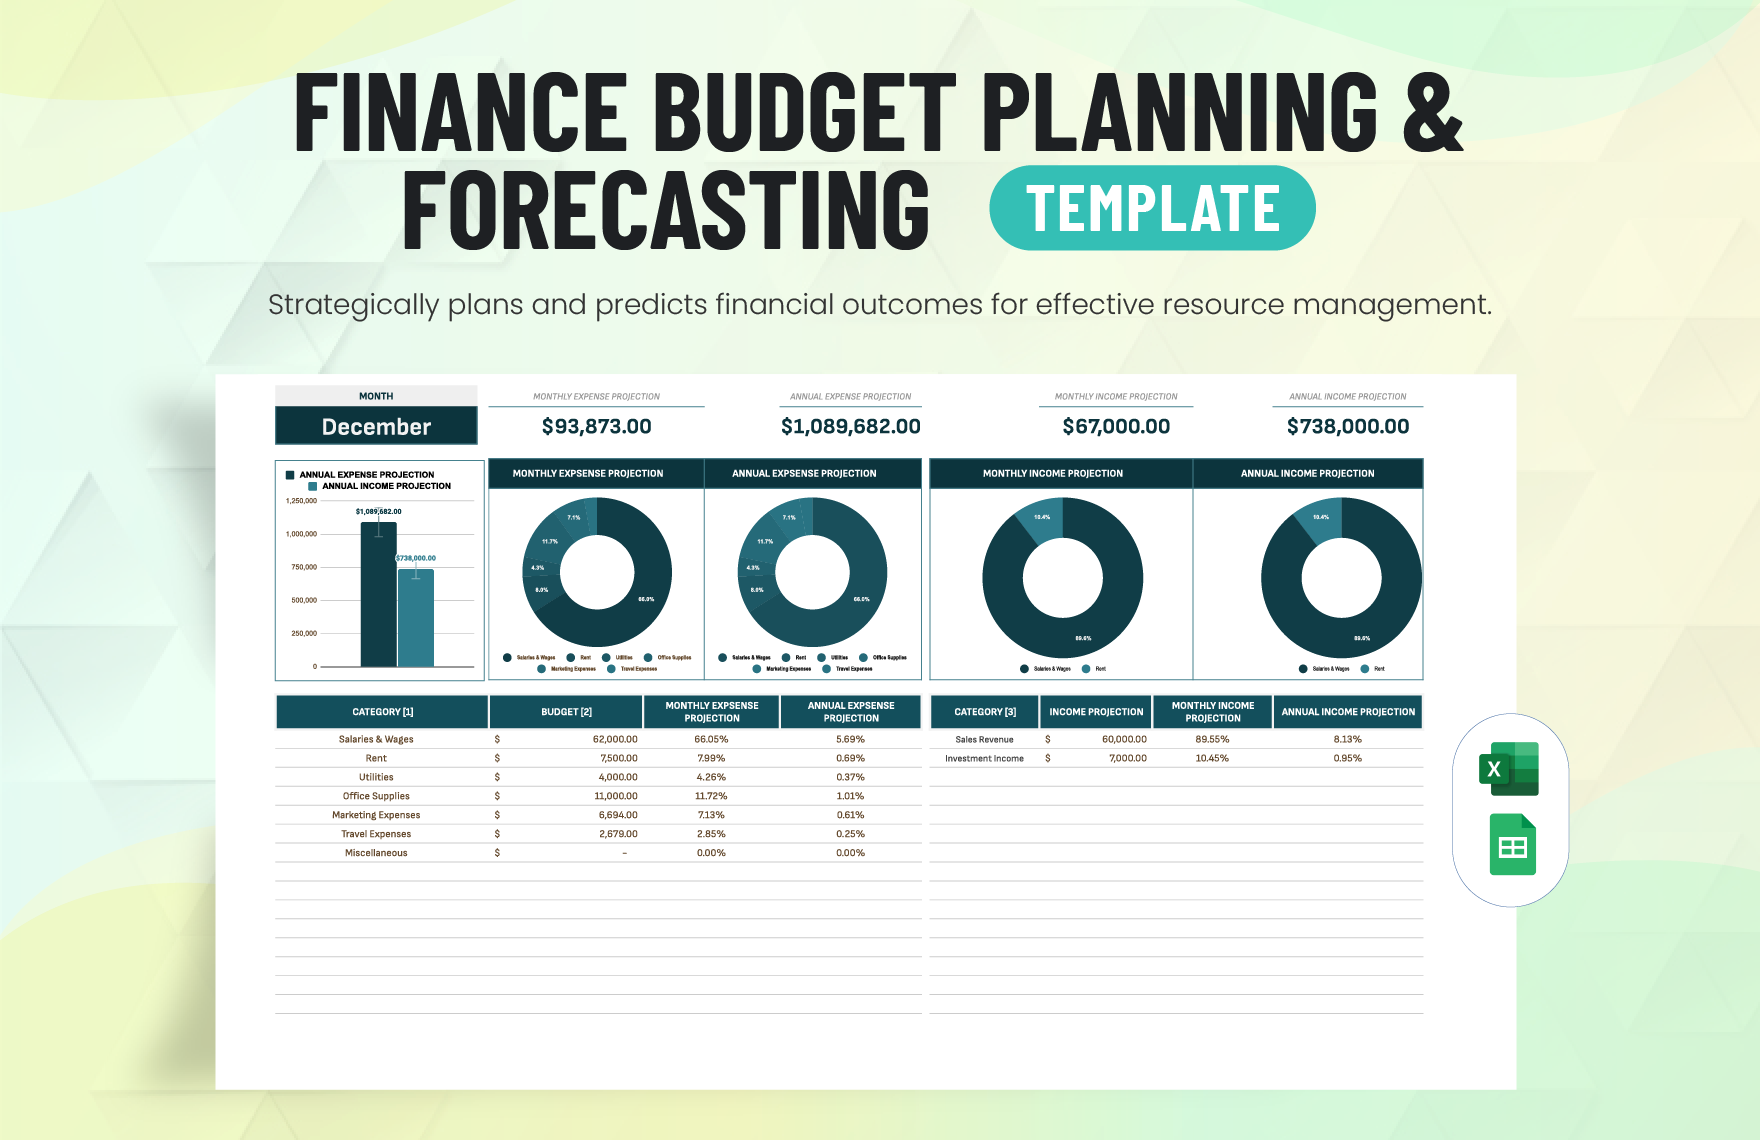 Finance Budget Planning & Forecasting Template in Excel, Google Sheets